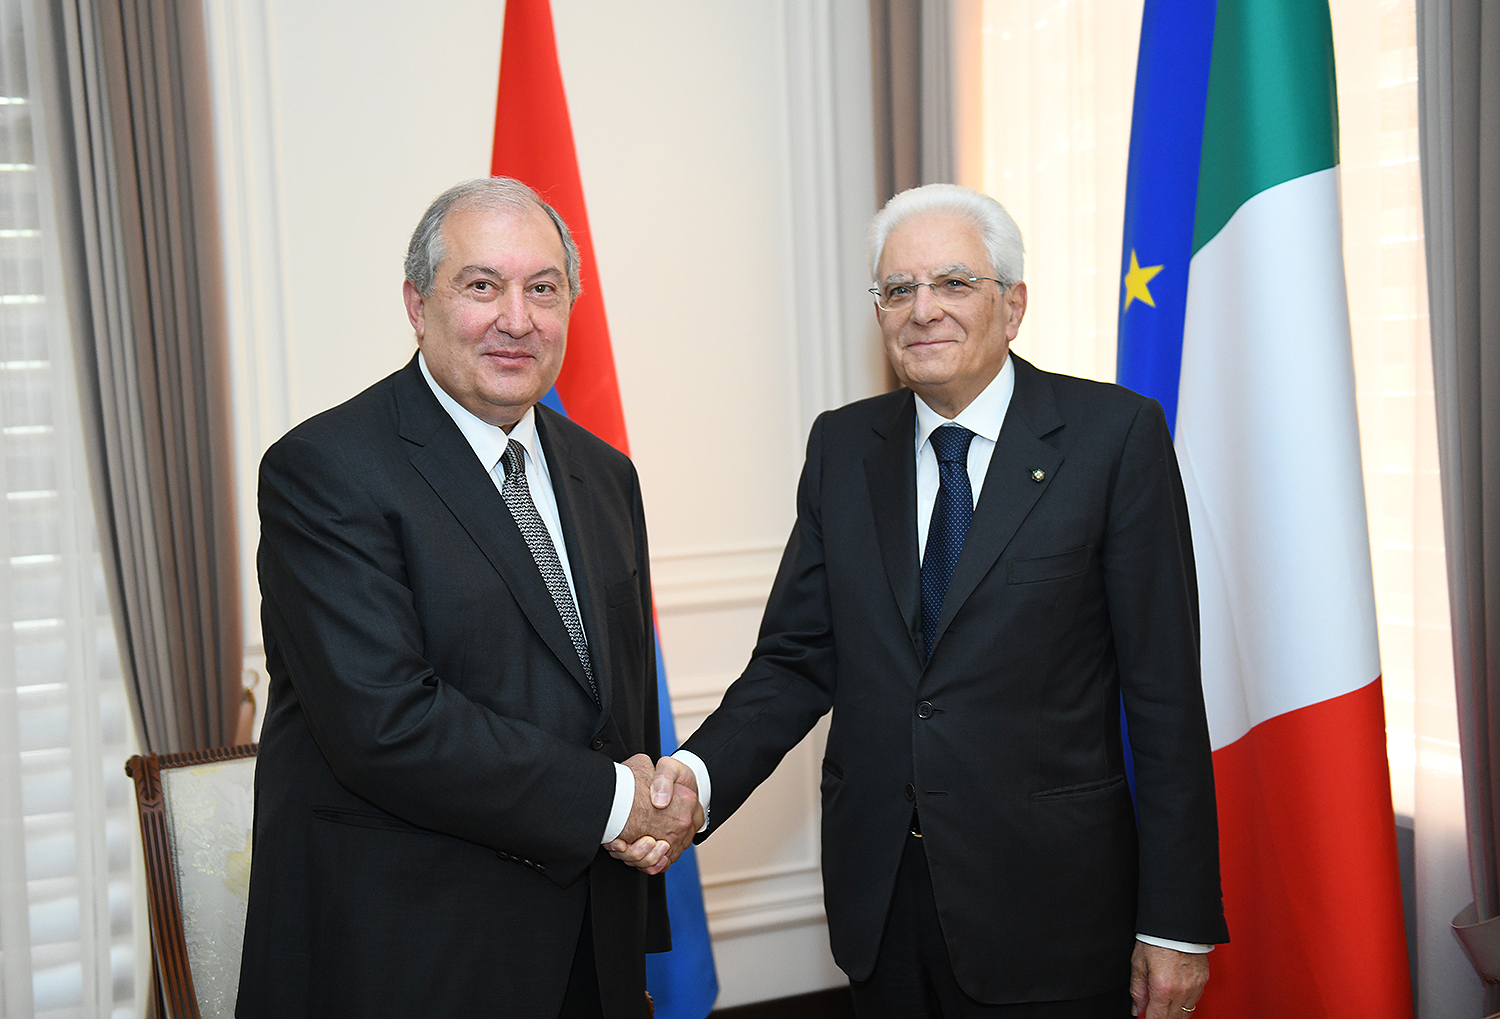 Meeting of the Presidents of Armenia and Italy took place at the Presidential Palace